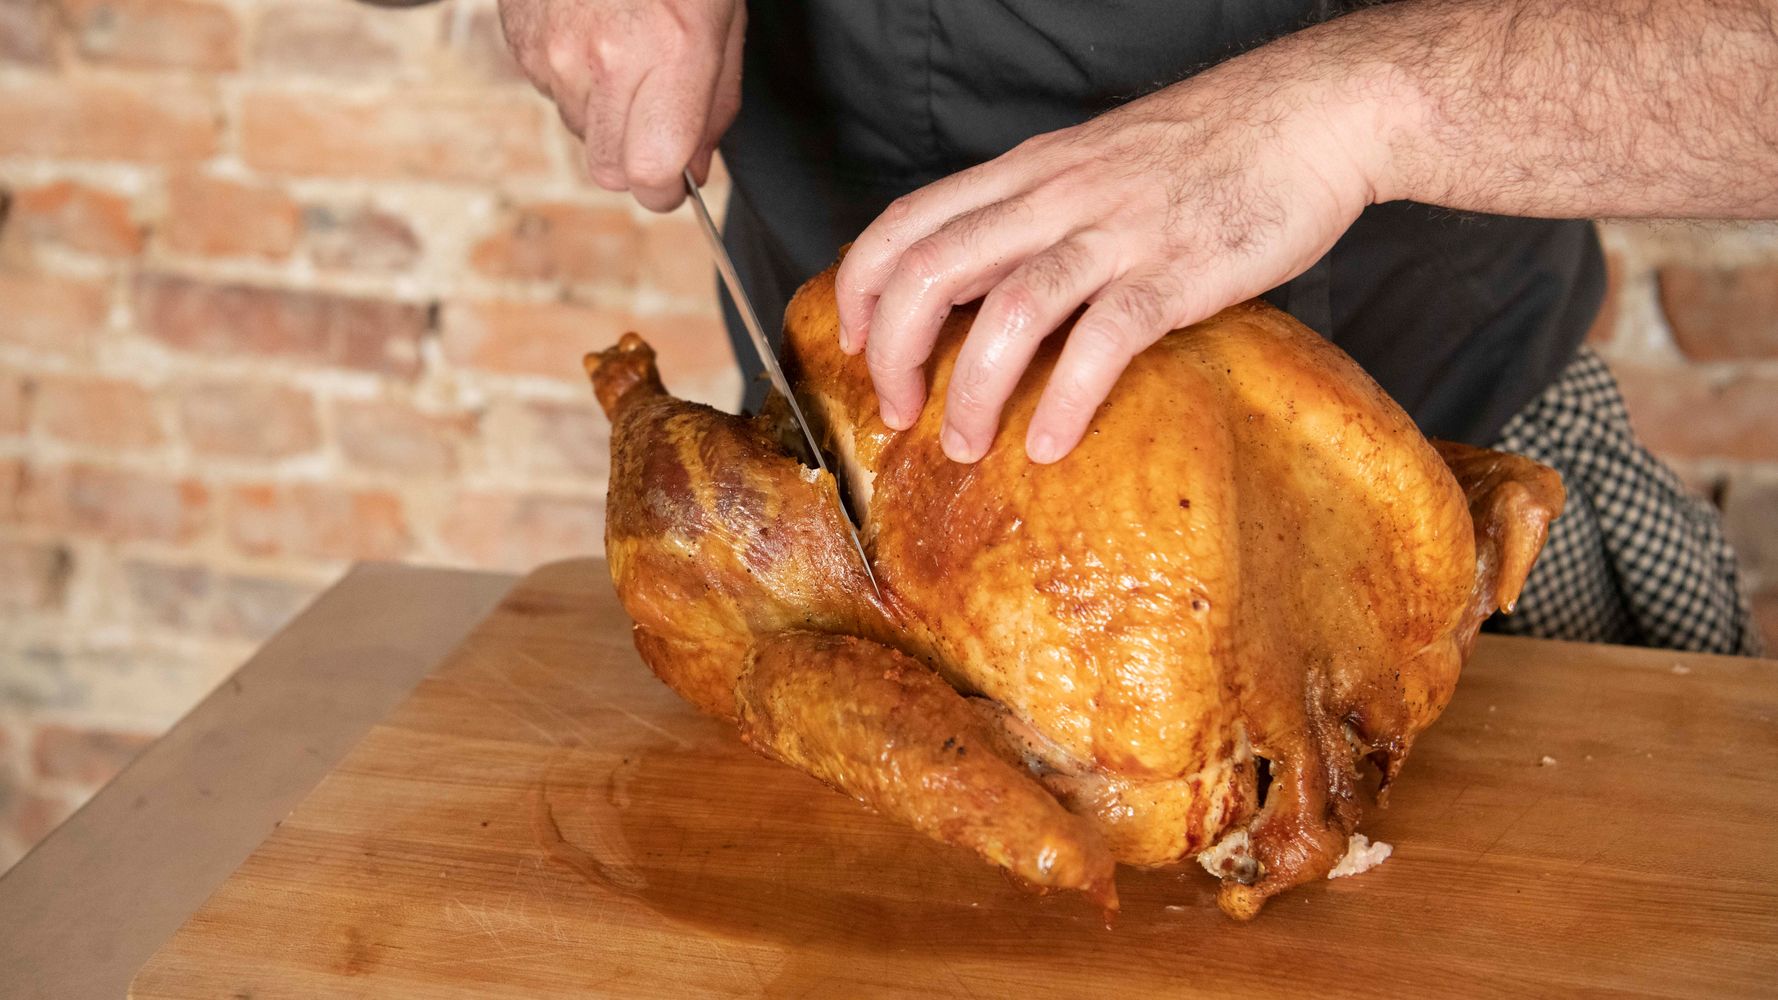 How To Carve A Turkey, With Step-By-Step Photos